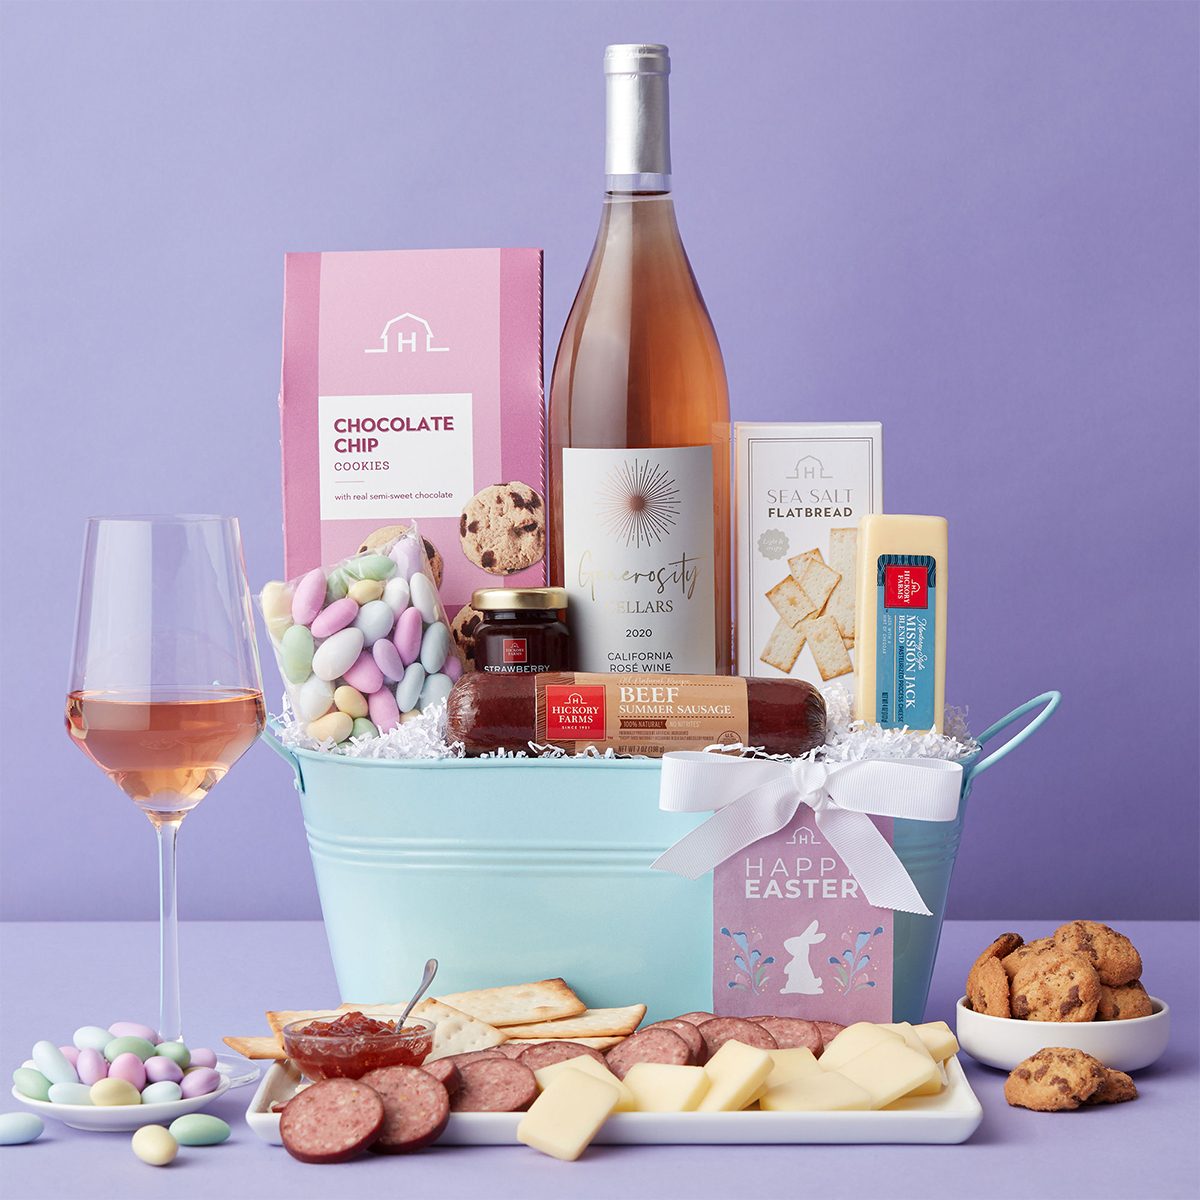 https://www.rd.com/wp-content/uploads/2023/03/Best-for-the-one-who-says-yes-way-rose-Hickory-Farms-Gourmet-Easter-Wine-Gift-Basket_ecomm_via-hickoryfarms.com_.jpg?fit=700%2C700